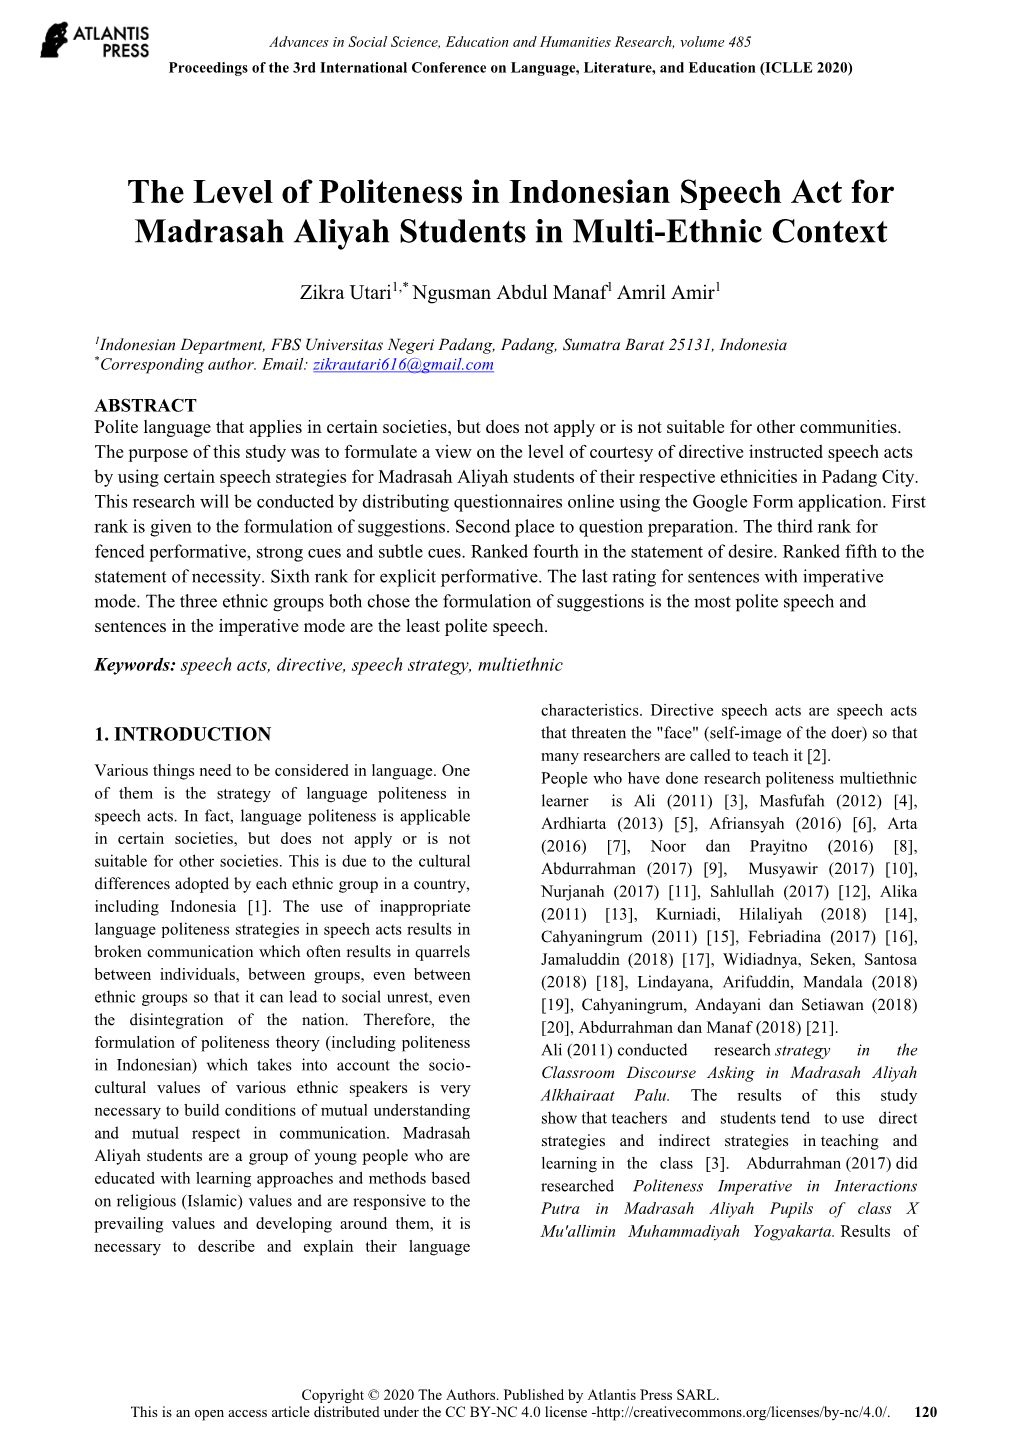 The Level of Politeness in Indonesian Speech Act for Madrasah Aliyah Students in Multi-Ethnic Context